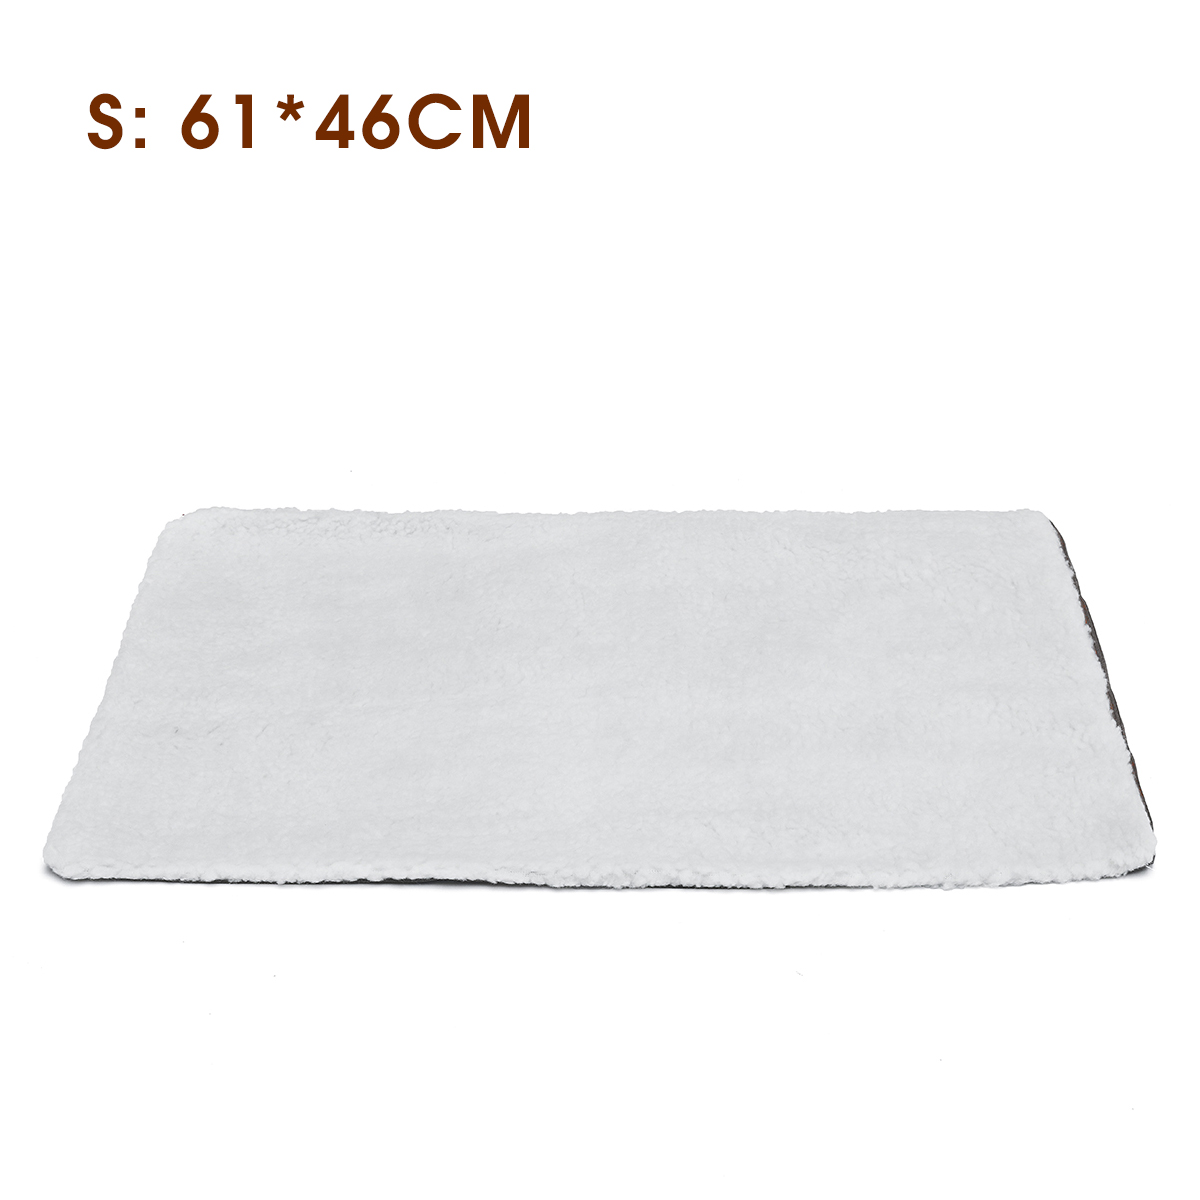 Large-Self-Heating-Dog-Bed-Fleece-Mat-Soft-Warm-Pet-Cat-Rug-Thermal-Washable-Pad-1567815-9